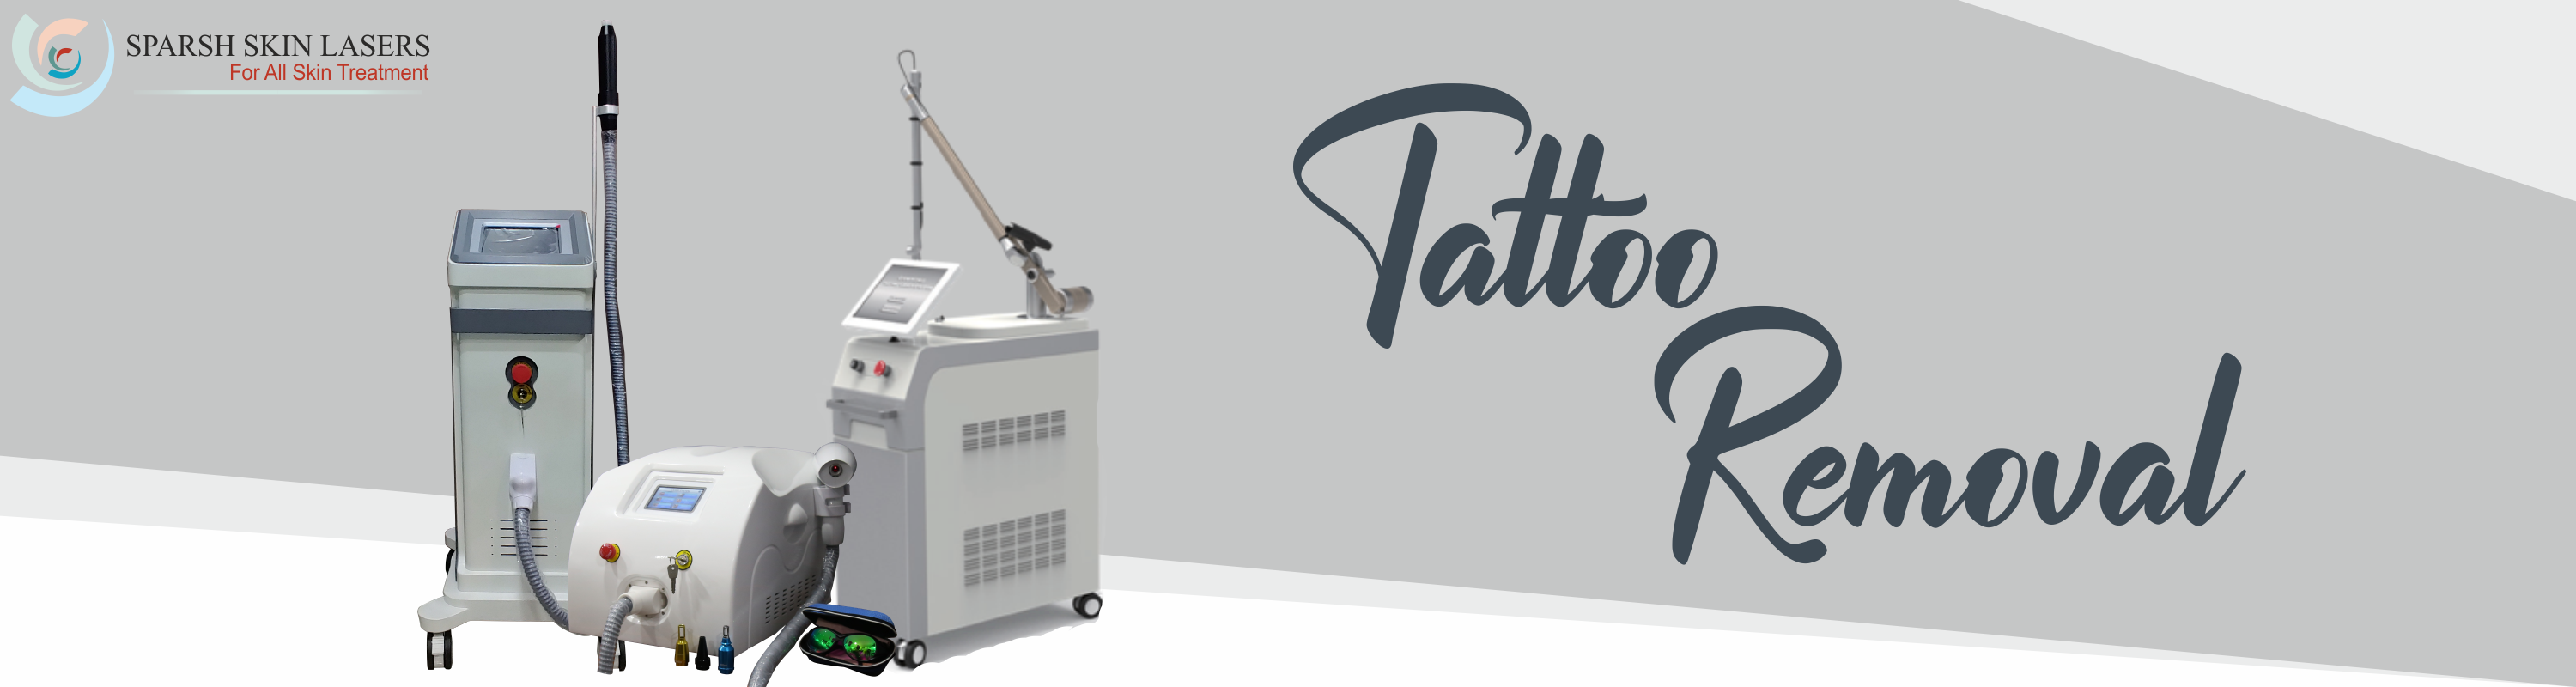 tattoo-removal-sparsh-skin-lasers